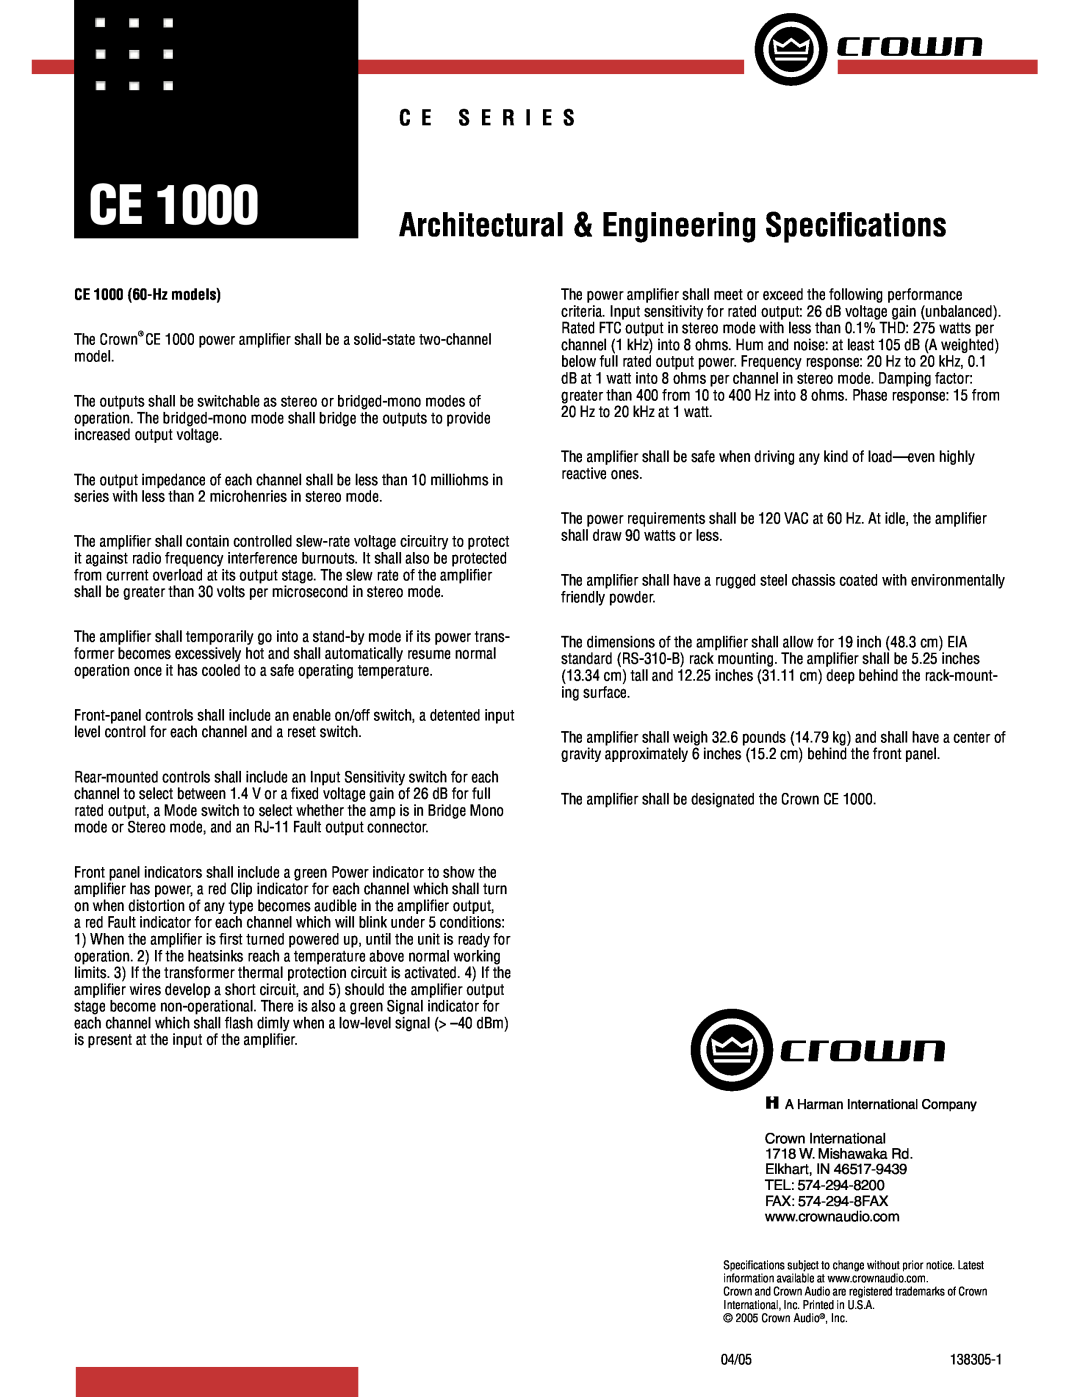 Crown Audio CE 1000 A. & E specifications Architectural & Engineering Speciﬁcations, C E S E R I E S, CE 1000 60-Hzmodels 